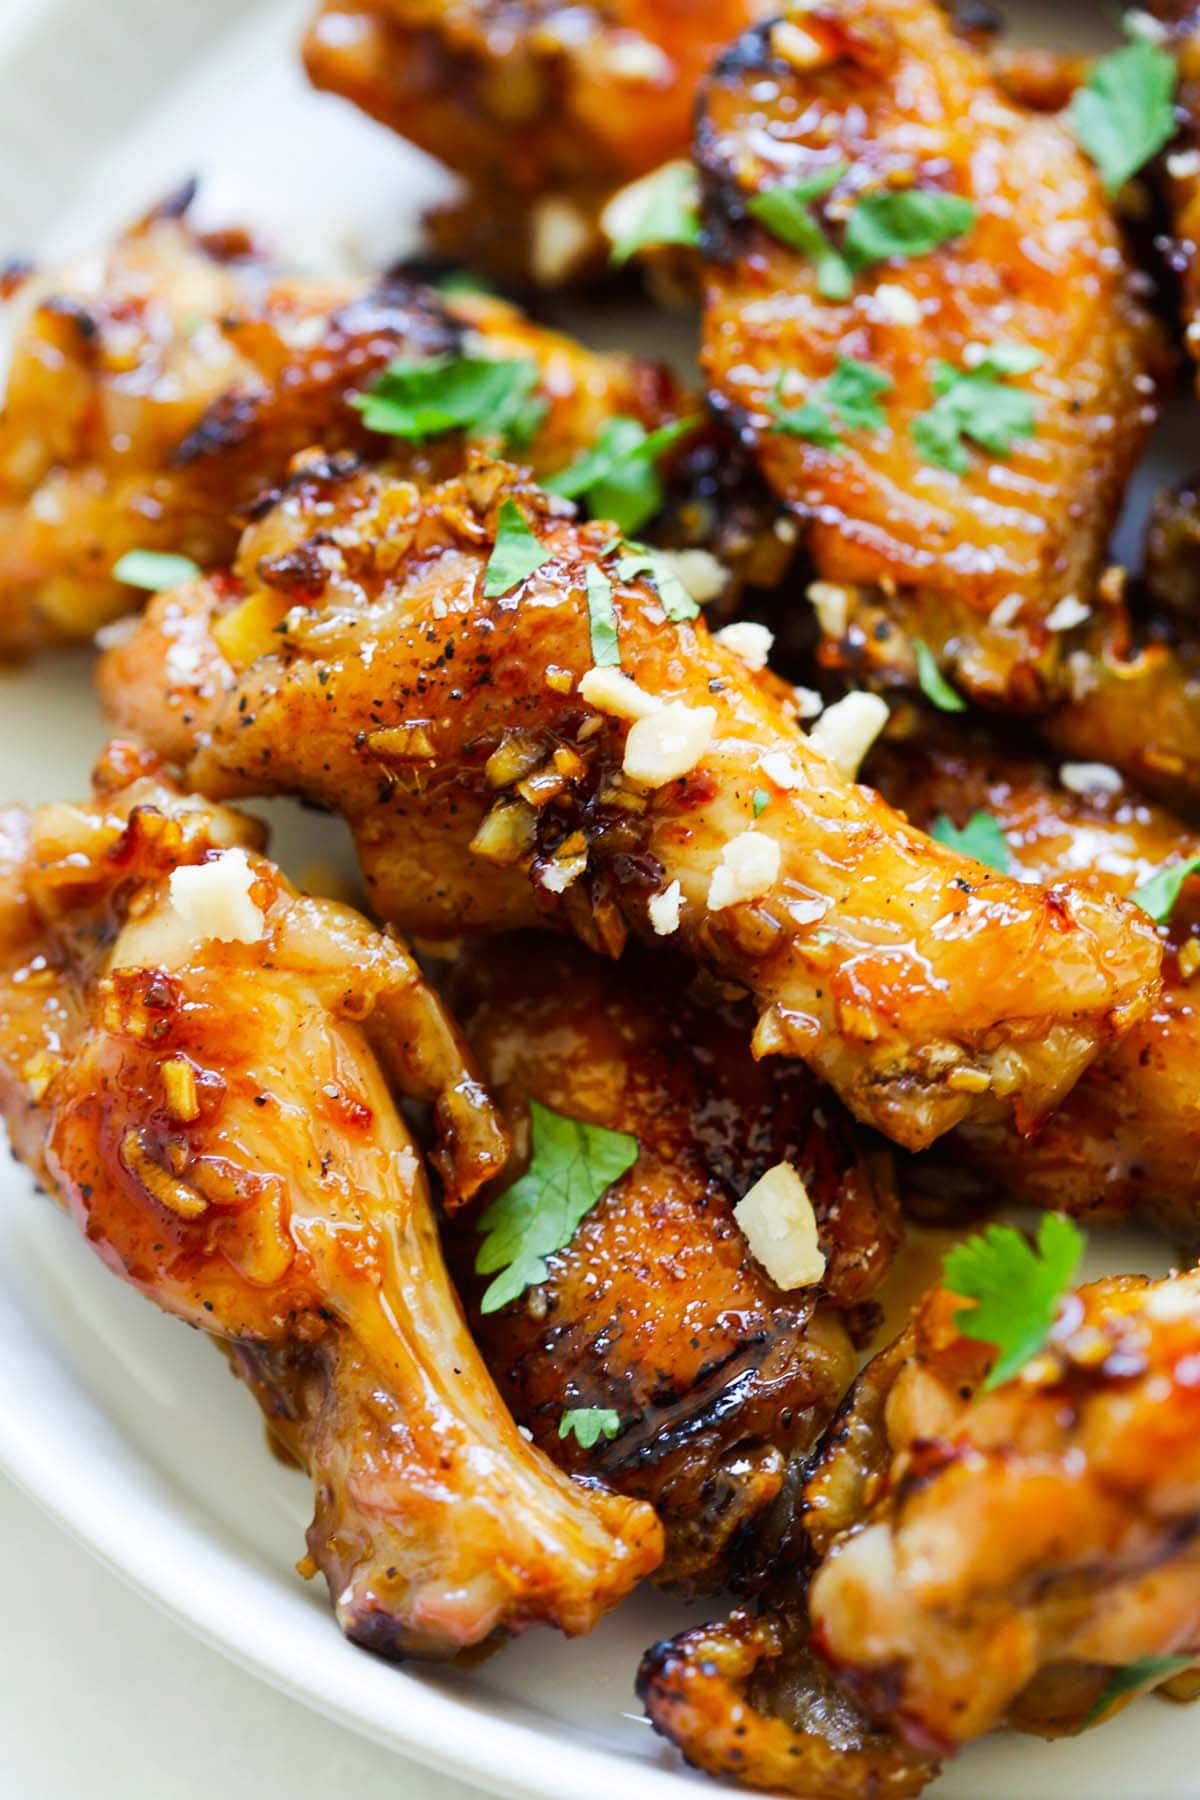 Easy and quick Asian goma chicken wings recipe.